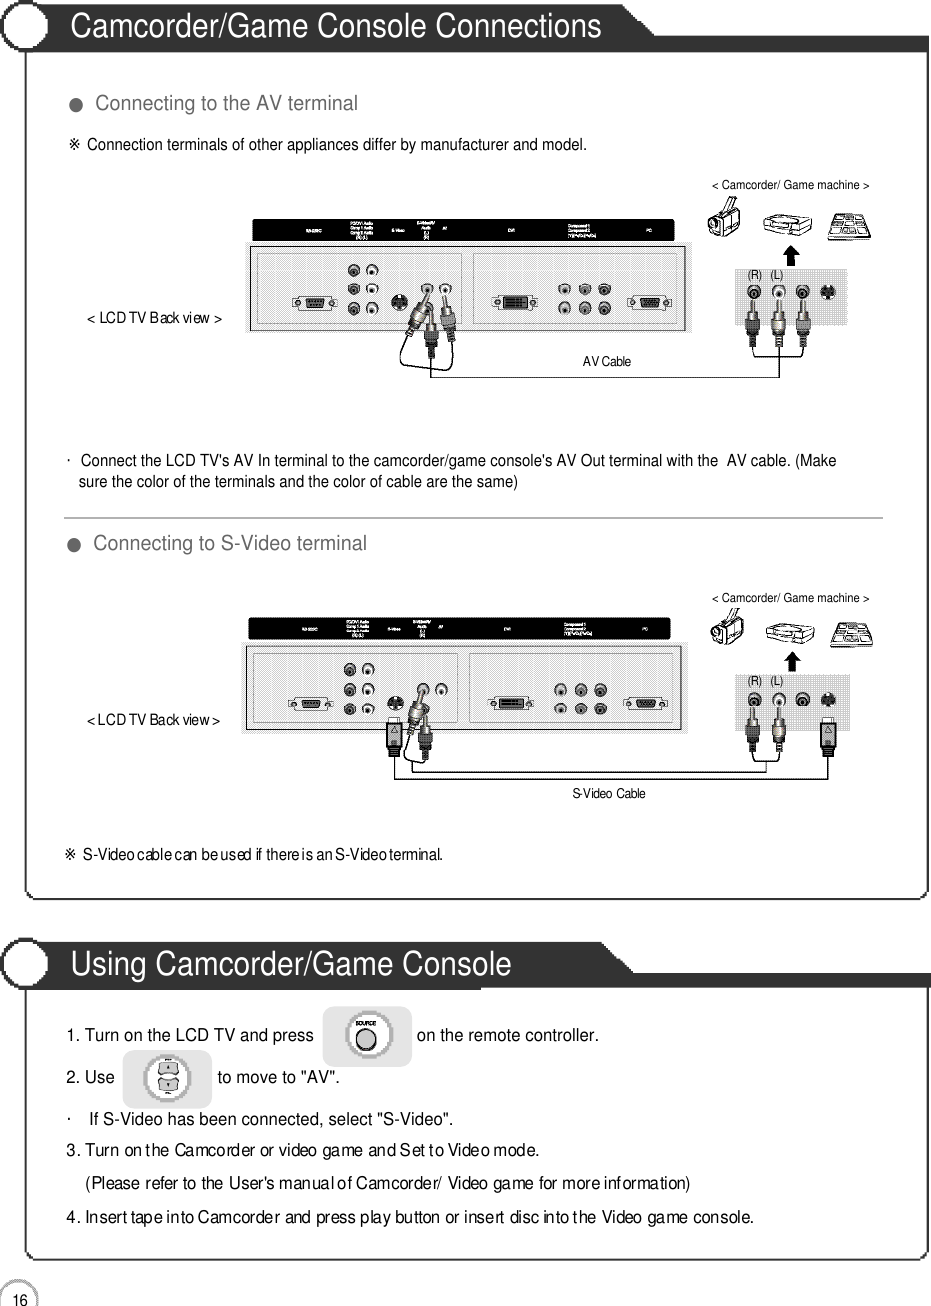 Camcorder/Game Console ConnectionsUsing Camcorder/Game Console1 6Connection1. Turn on the LCD TV and press                      on the remote controller. 2. Use                      to move to &quot;AV&quot;. ・If S-Video has been connected, select &quot;S-Video&quot;. 3. Turn on the Camcorder or video game and Set to Video mode.(Please refer to the User&apos;s manual of Camcorder/ Video game for more information)4. Insert tape into Camcorder and press play button or insert disc into the Video game console.※Connection terminals of other appliances differ by manufacturer and model.&lt; LCD TV Back view &gt;&lt; LCD TV Back view &gt;AV CableS-Video Cable・Connect the LCD TV&apos;s AV In terminal to the camcorder/game console&apos;s AV Out terminal with the  AV cable. (Makesure the color of the terminals and the color of cable are the same)※S-Video cable can be used if there is an S-Video terminal. ●Connecting to the AV terminal●Connecting to S-Video terminal( R ) ( L )&lt; Camcorder/ Game machine &gt;( R ) ( L )&lt; Camcorder/ Game machine &gt;